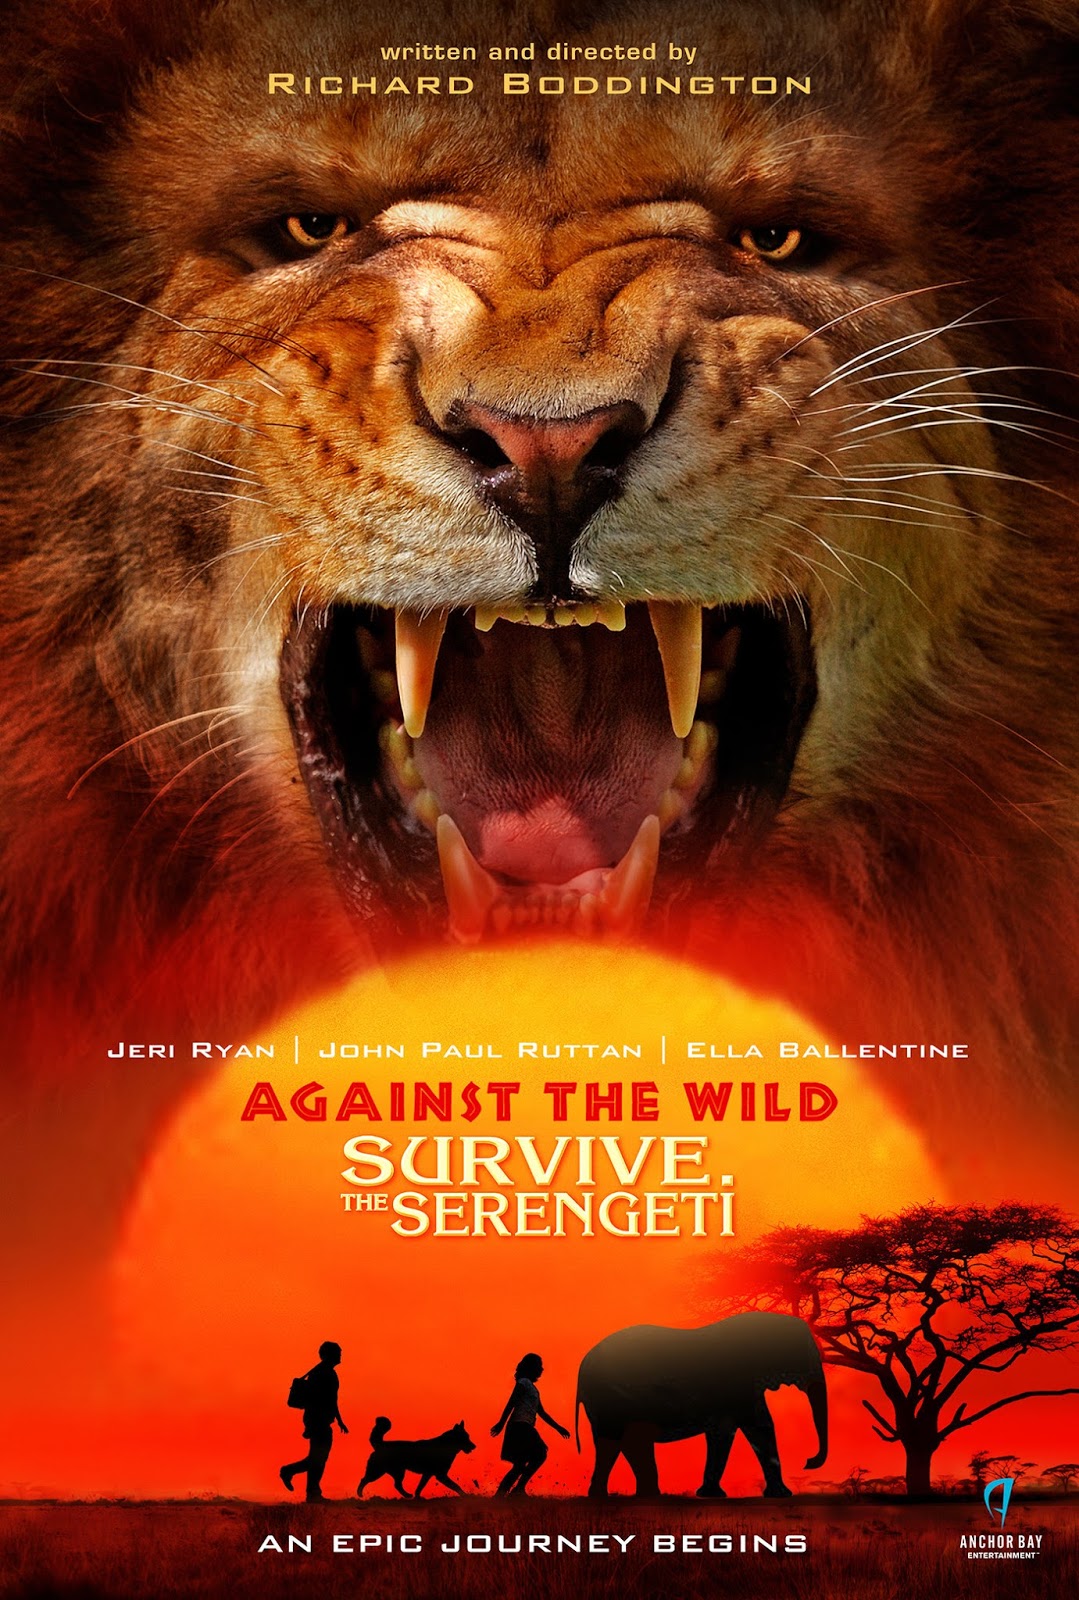 Against the Wild 2: Survive the Serengeti 2016 - Full (HD)